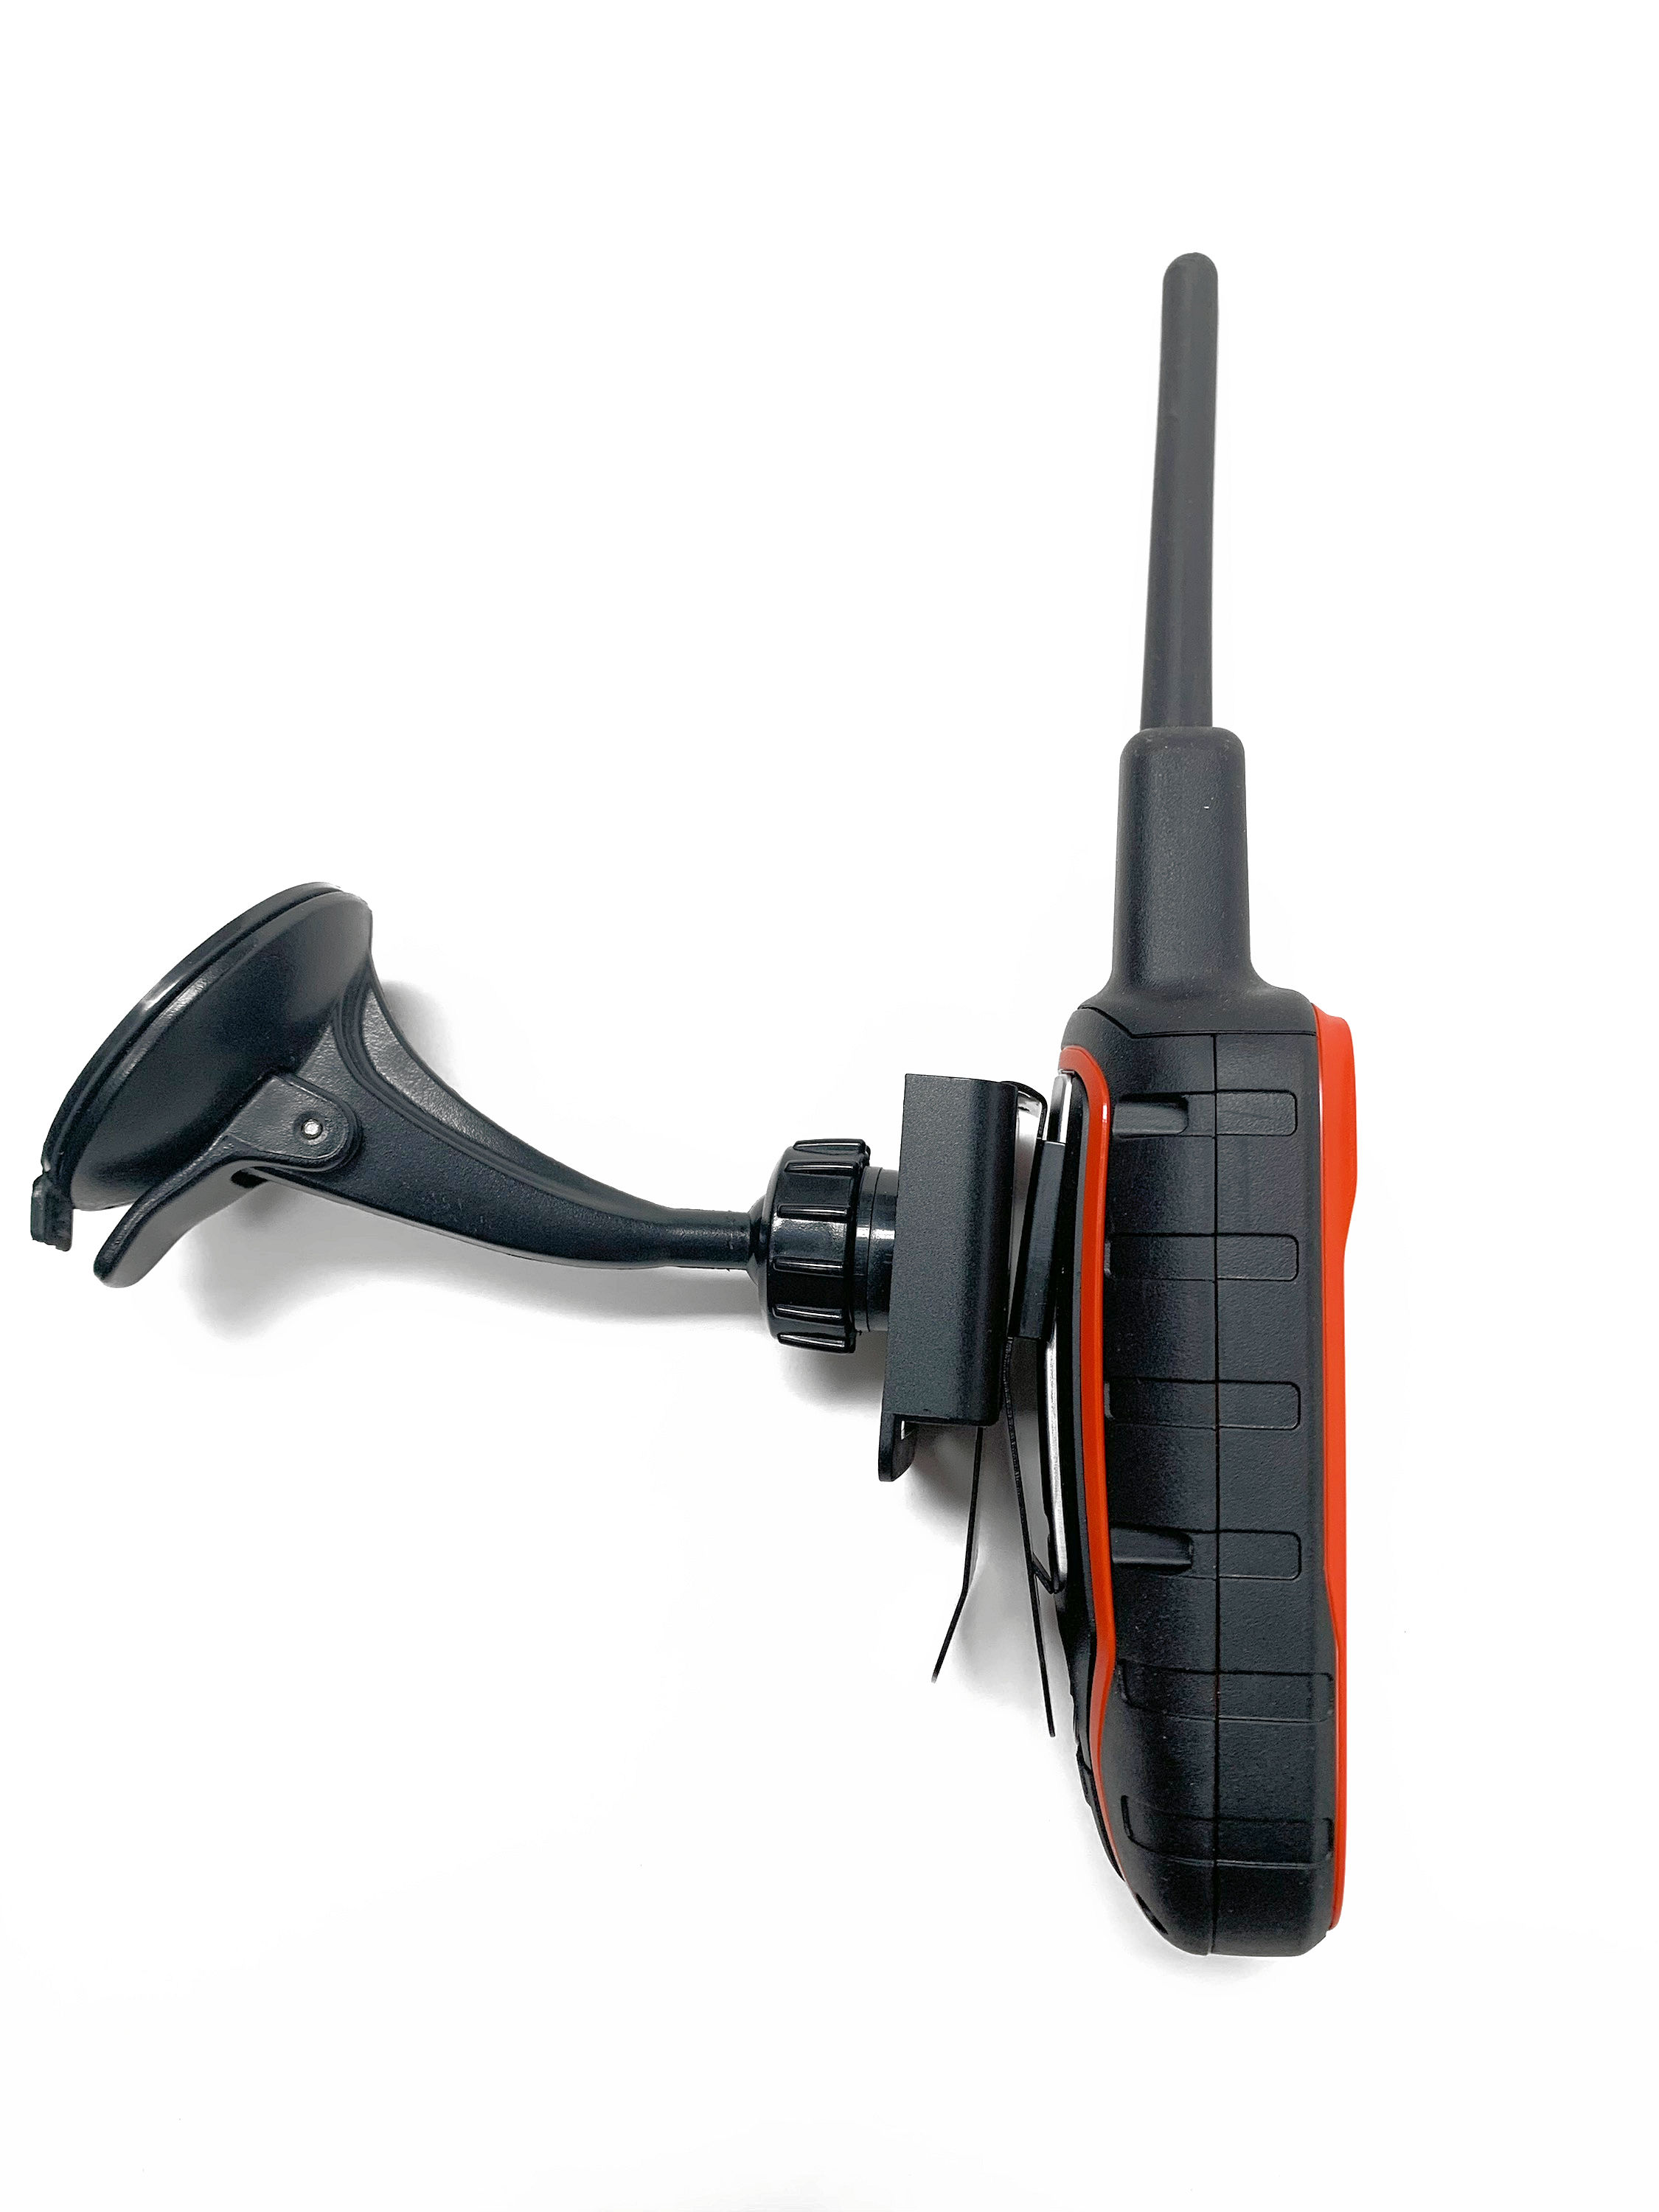 Suction Ball Tip Mount with Klipzer connector for Garmin Handheld